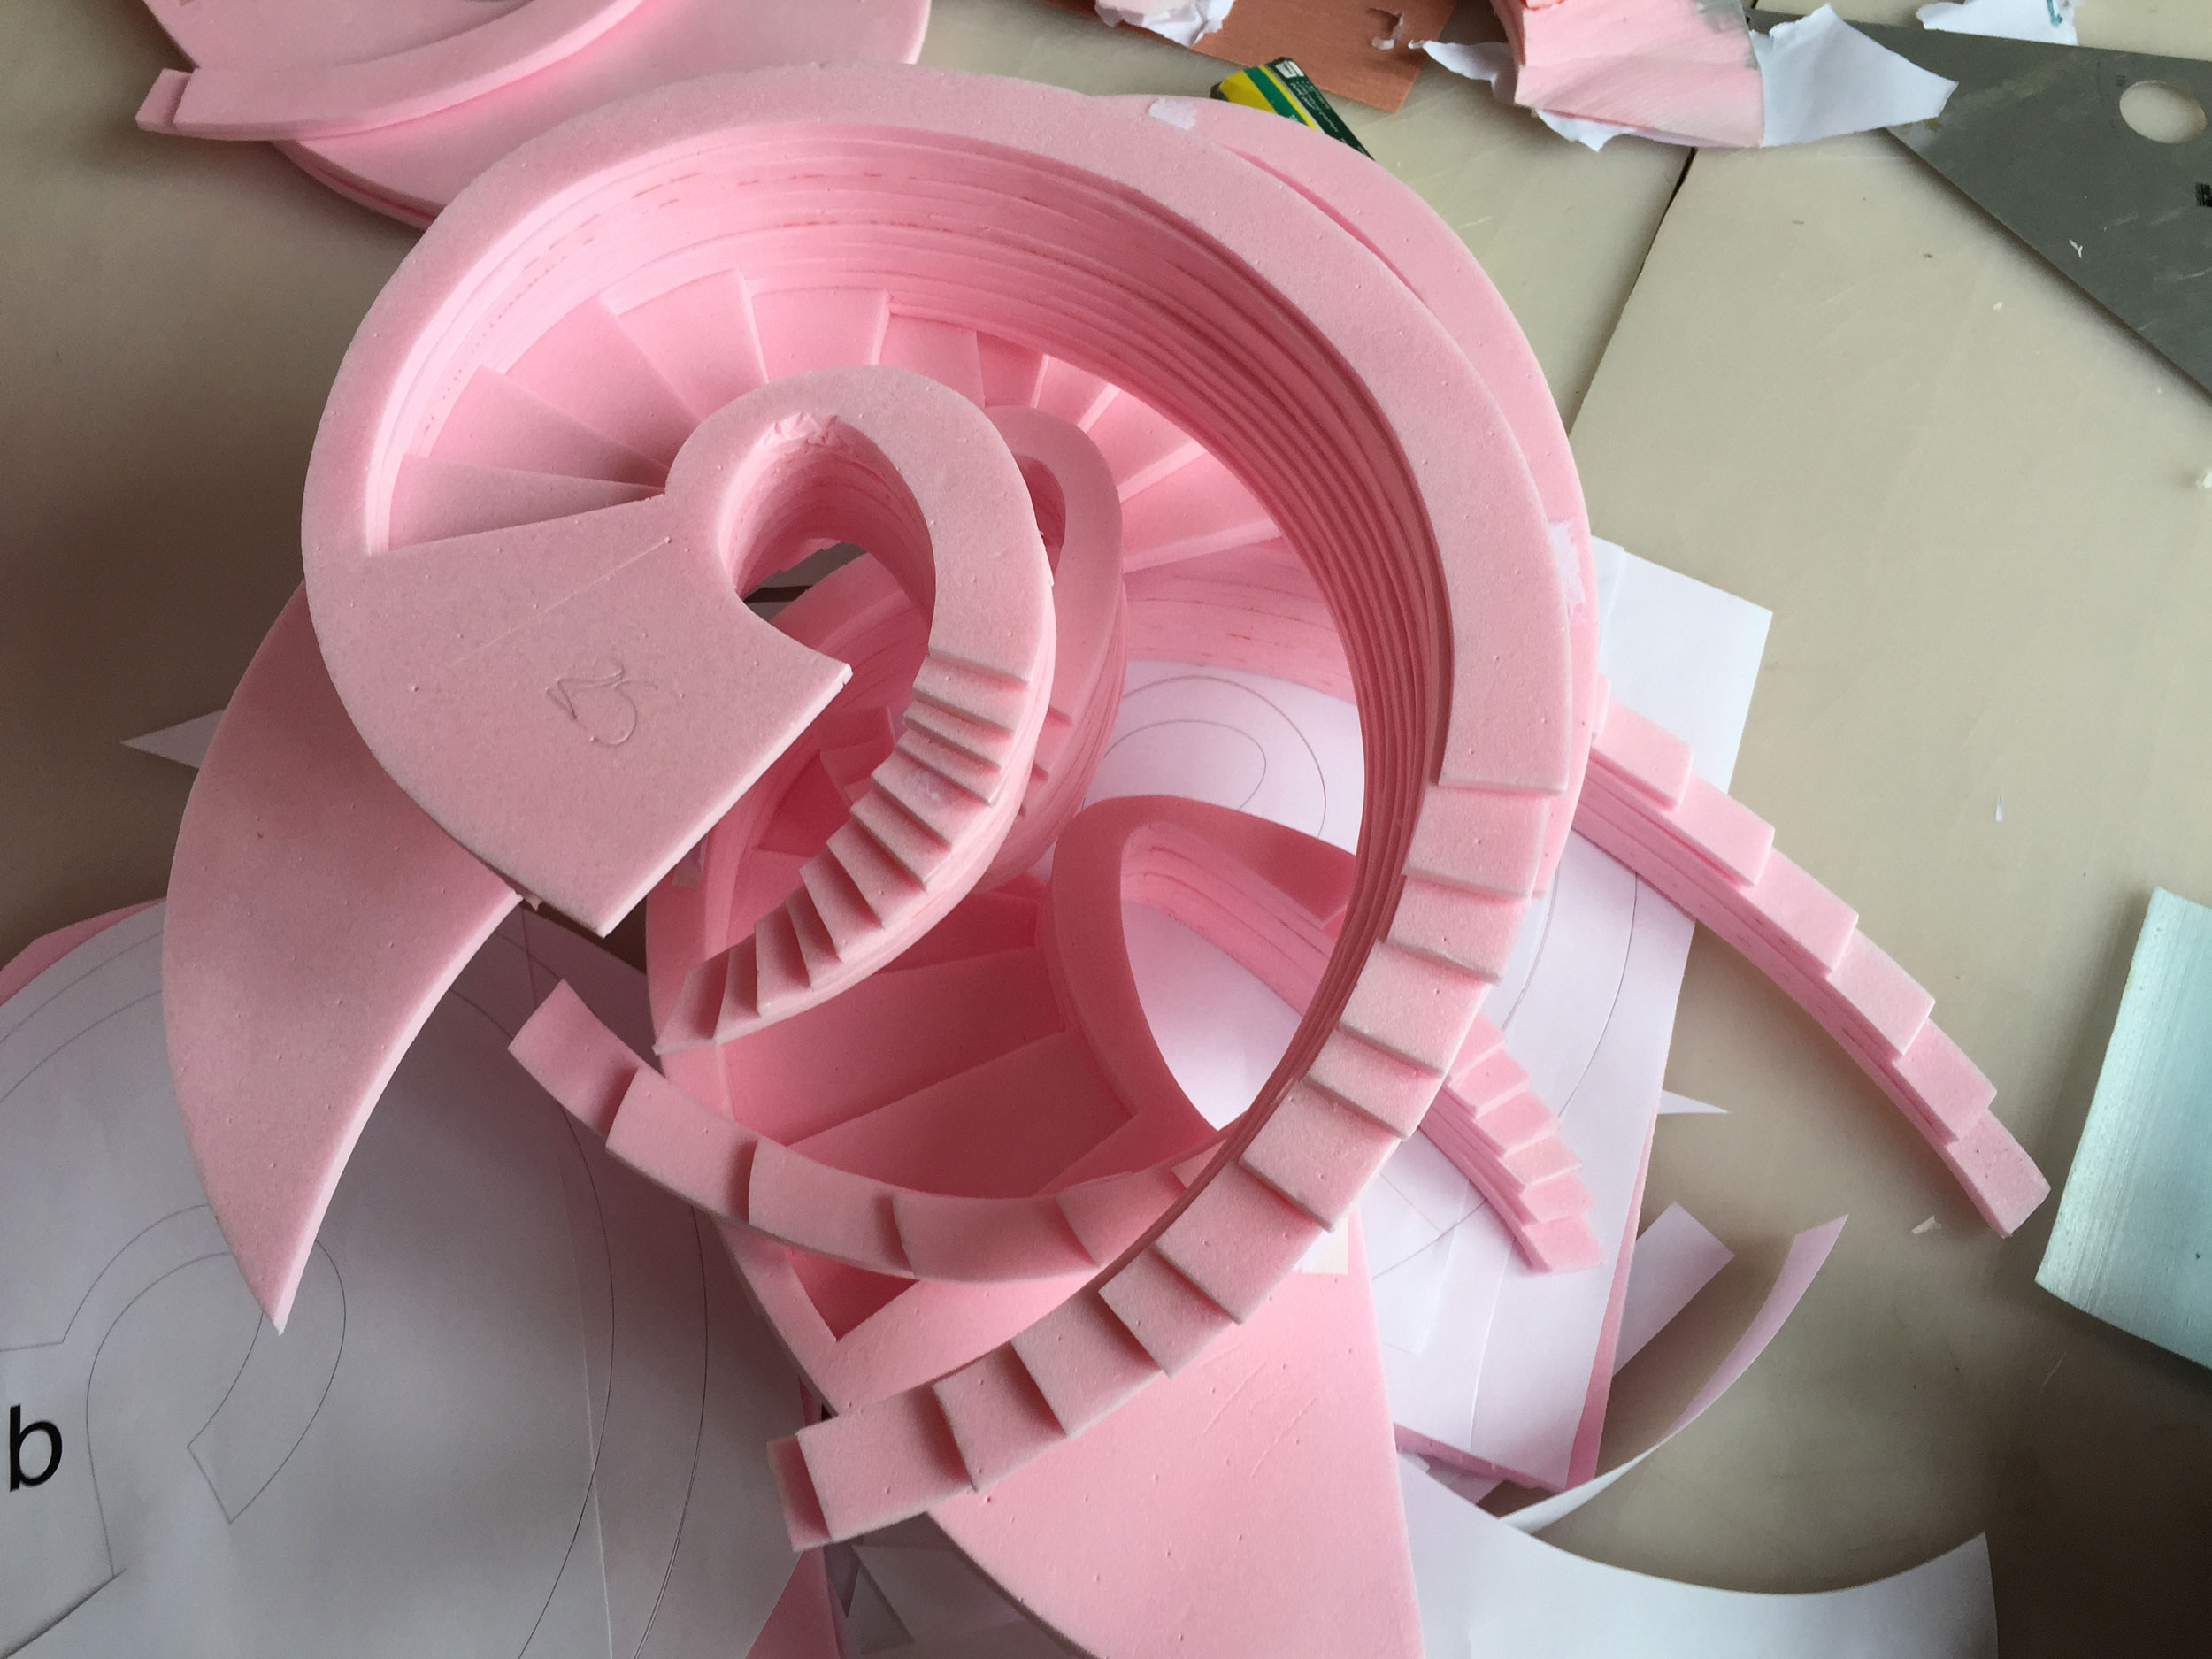 A photograph of the Necklace Residence sculptural stair model being constructed.